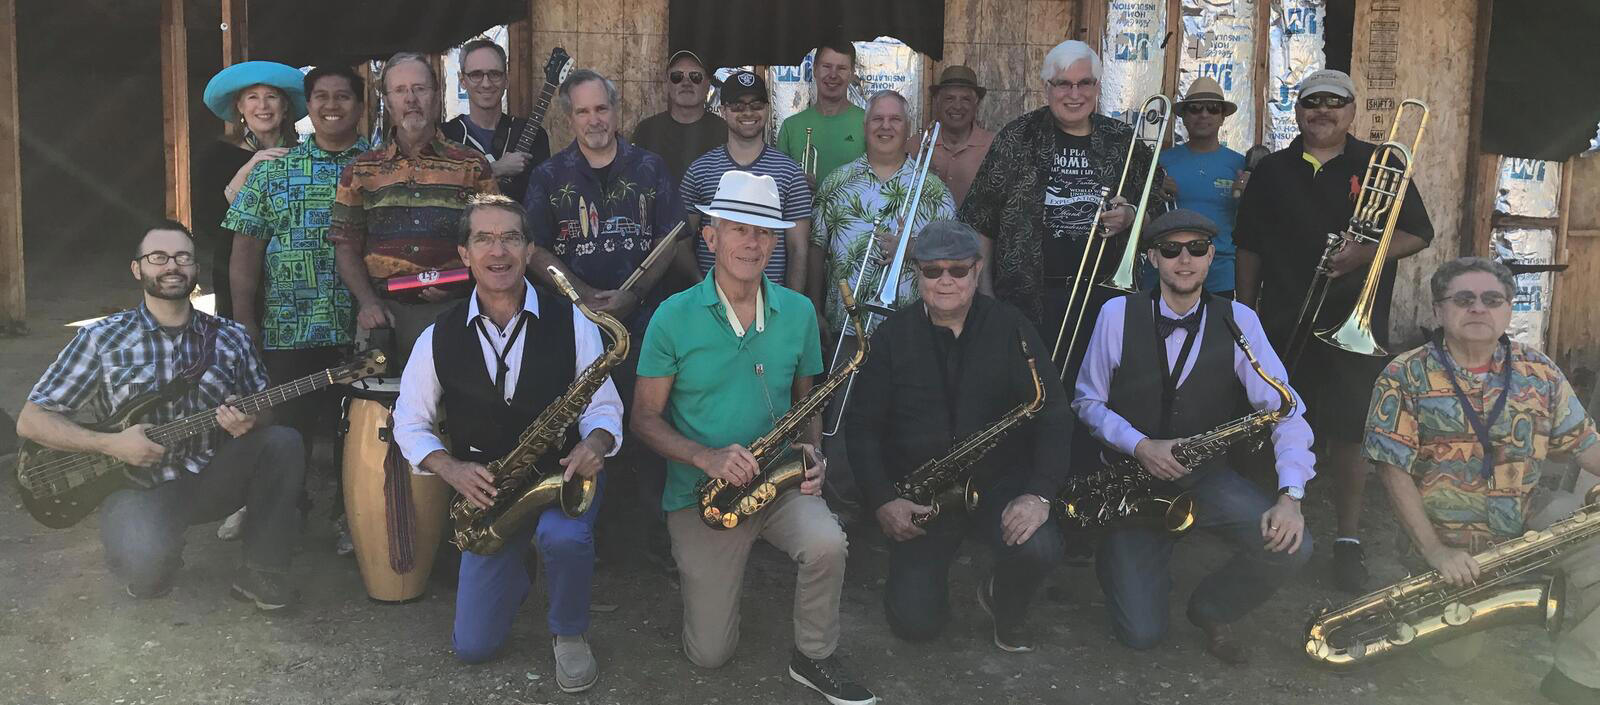 the CoolTones Big Band at Concerts in the Park this Friday! Pleasanton